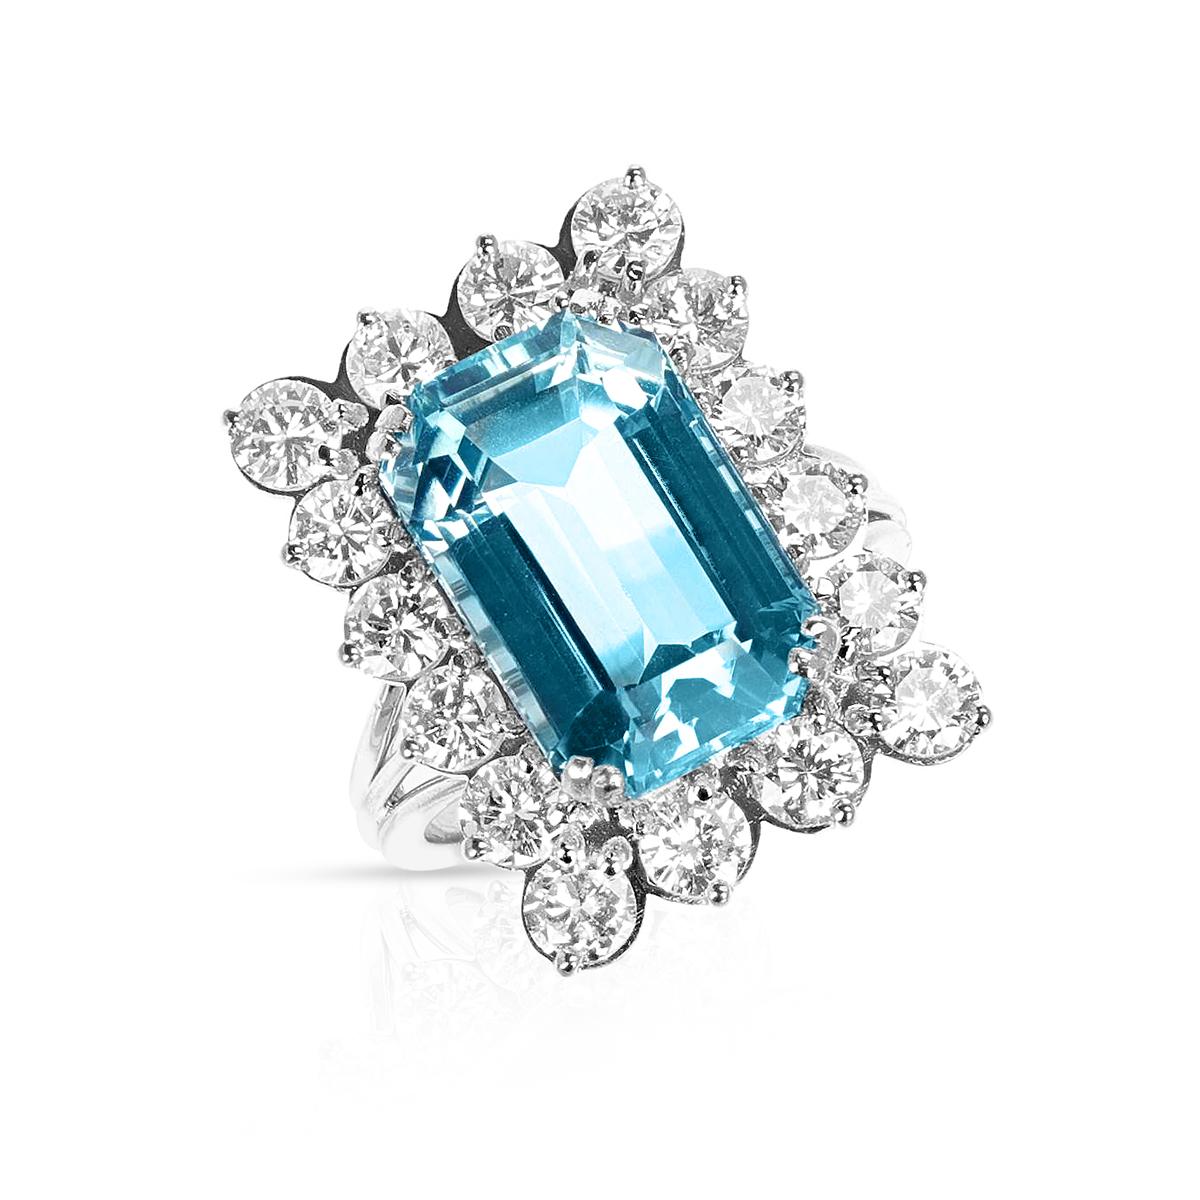 An Emerald-Cut Aquamarine and Diamond Cocktail Ring made in 18 Karat Yellow Gold. The aquamarine weighs appx 11.50 carats. The ring size is US.
